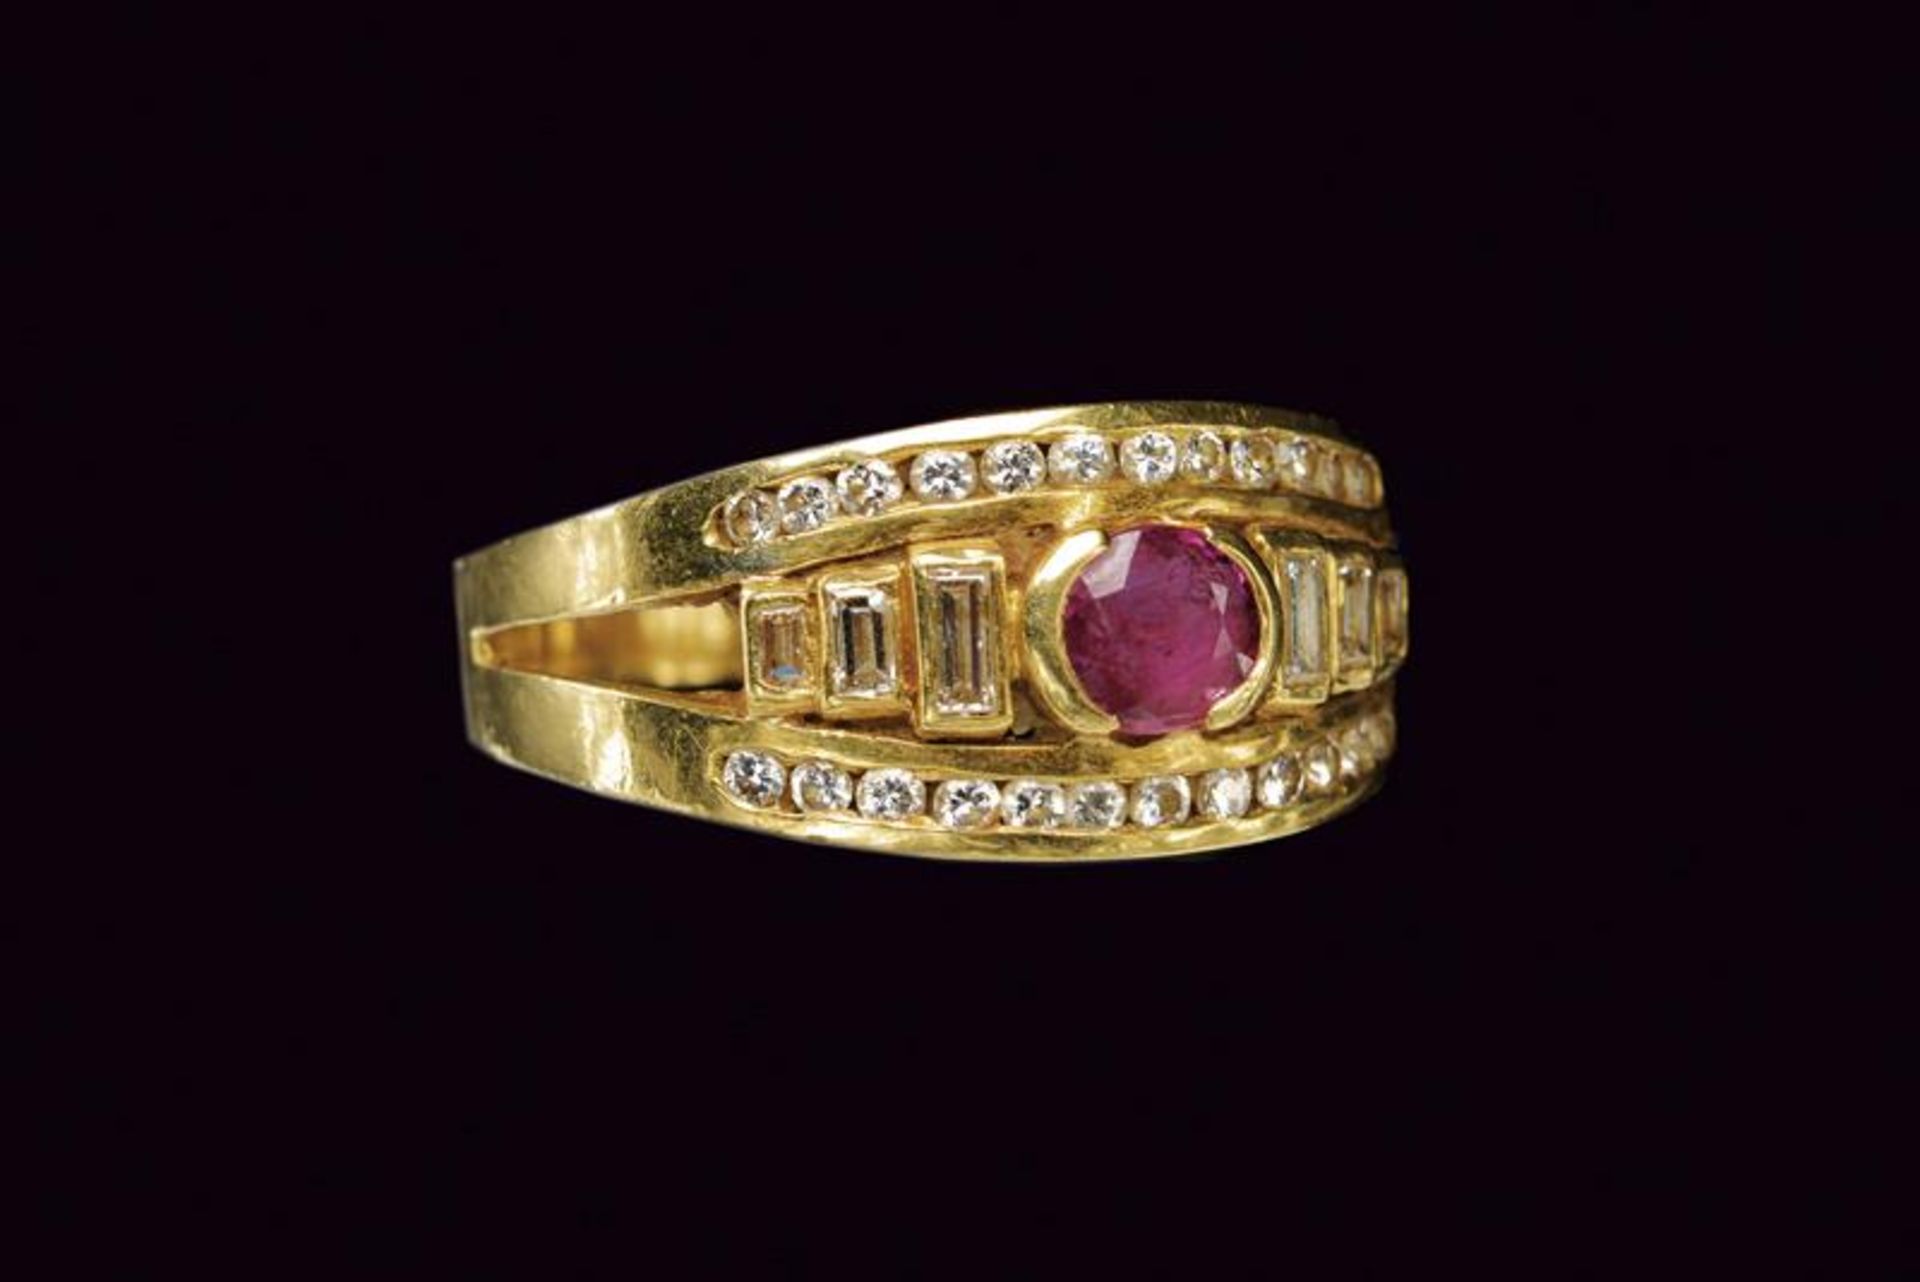 Diamond and ruby gold band ring - Image 2 of 3